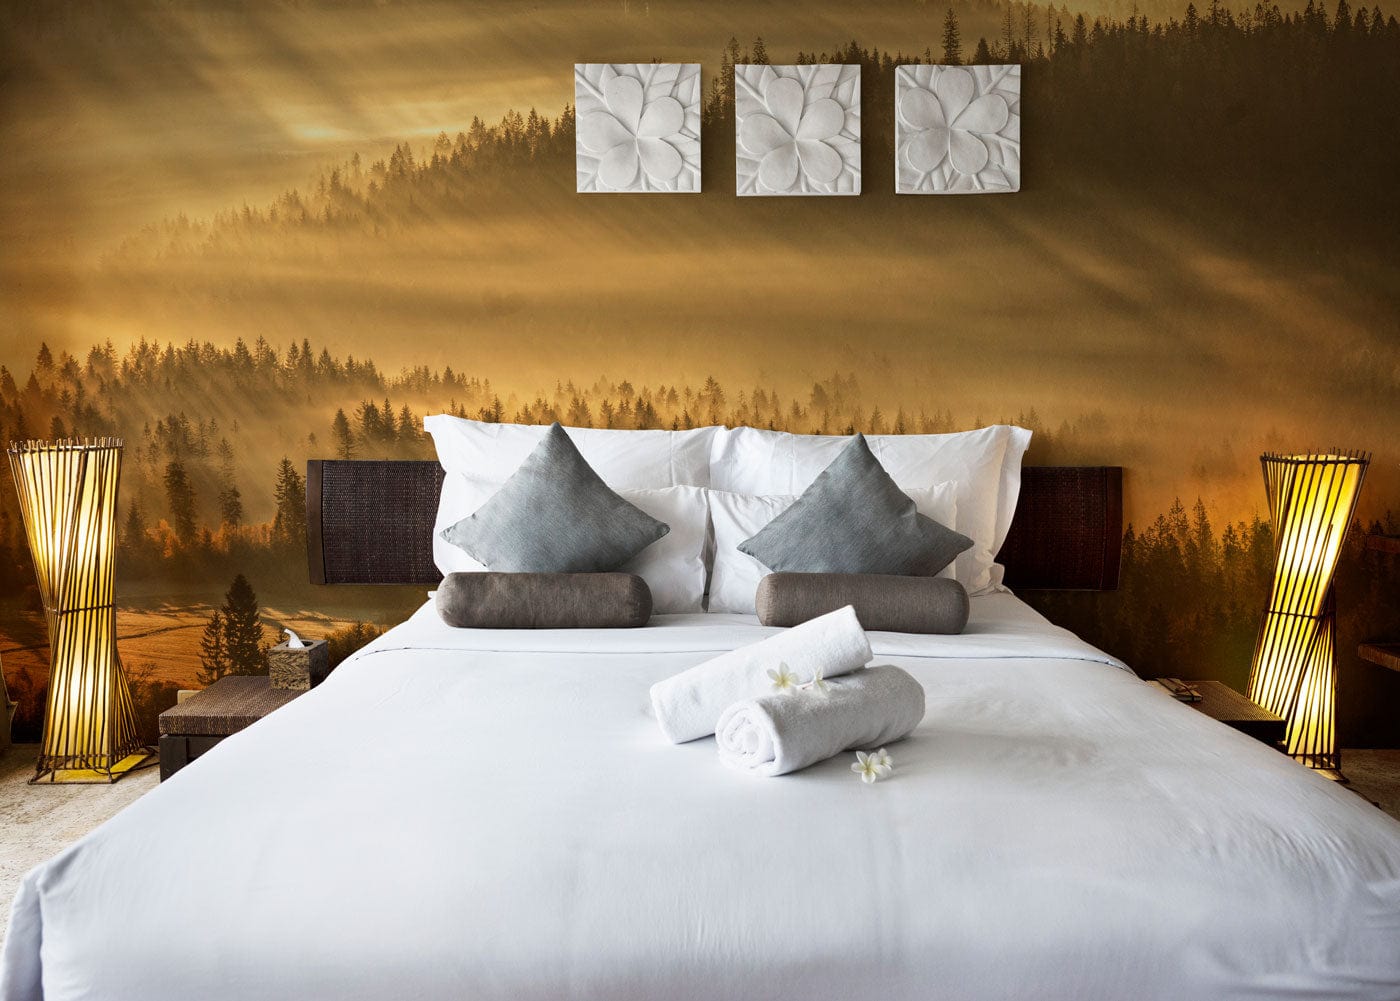 Wallpaper Mural of a Foggy Forest at Dawn for Bedroom Decoration